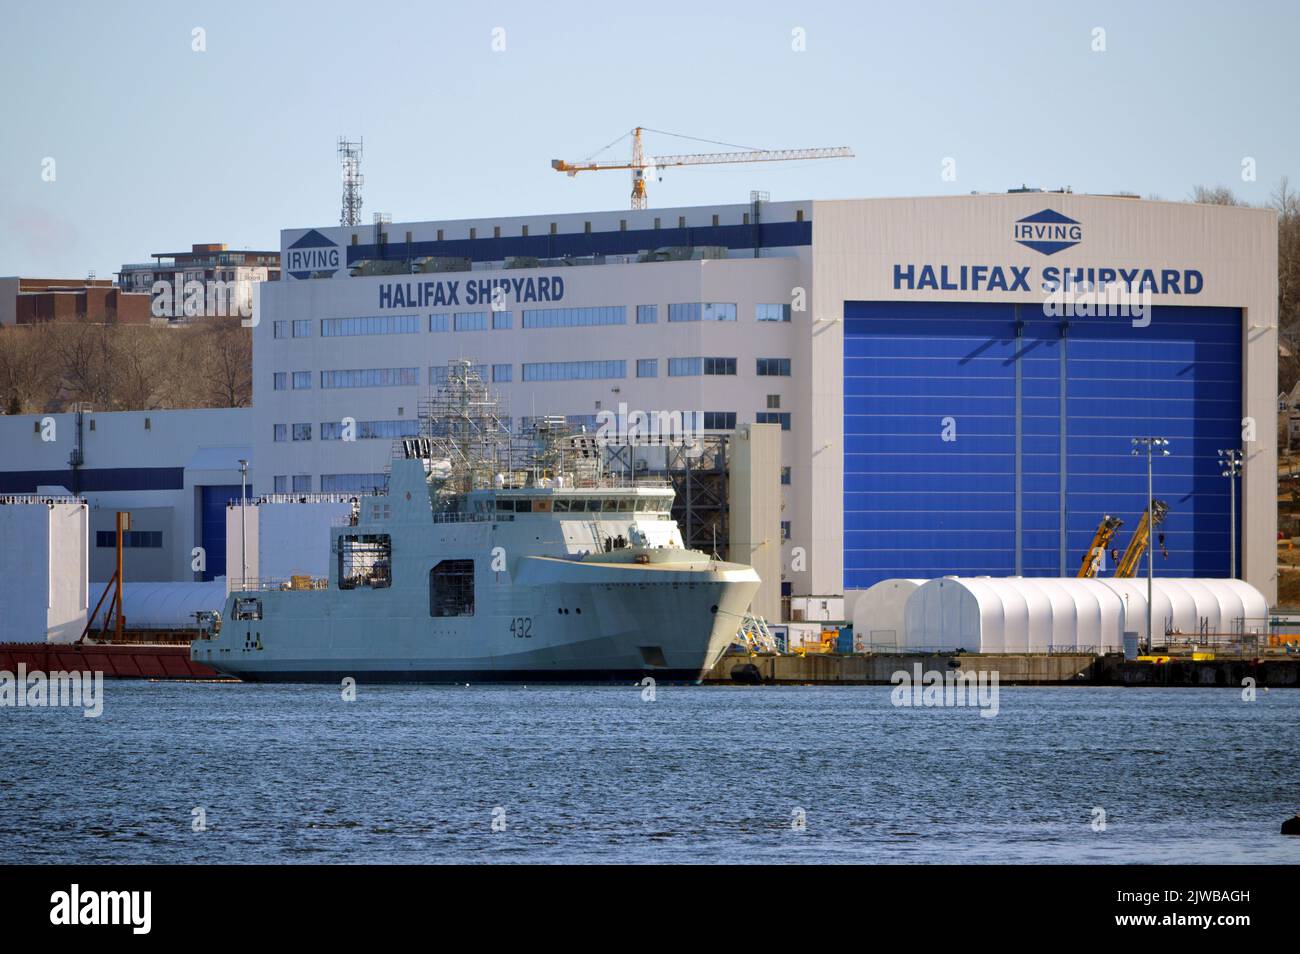 The Halifax Shipyard in Halifax, Nova Scotia, Canada, operated by Irving Shipbuilding. Stock Photo